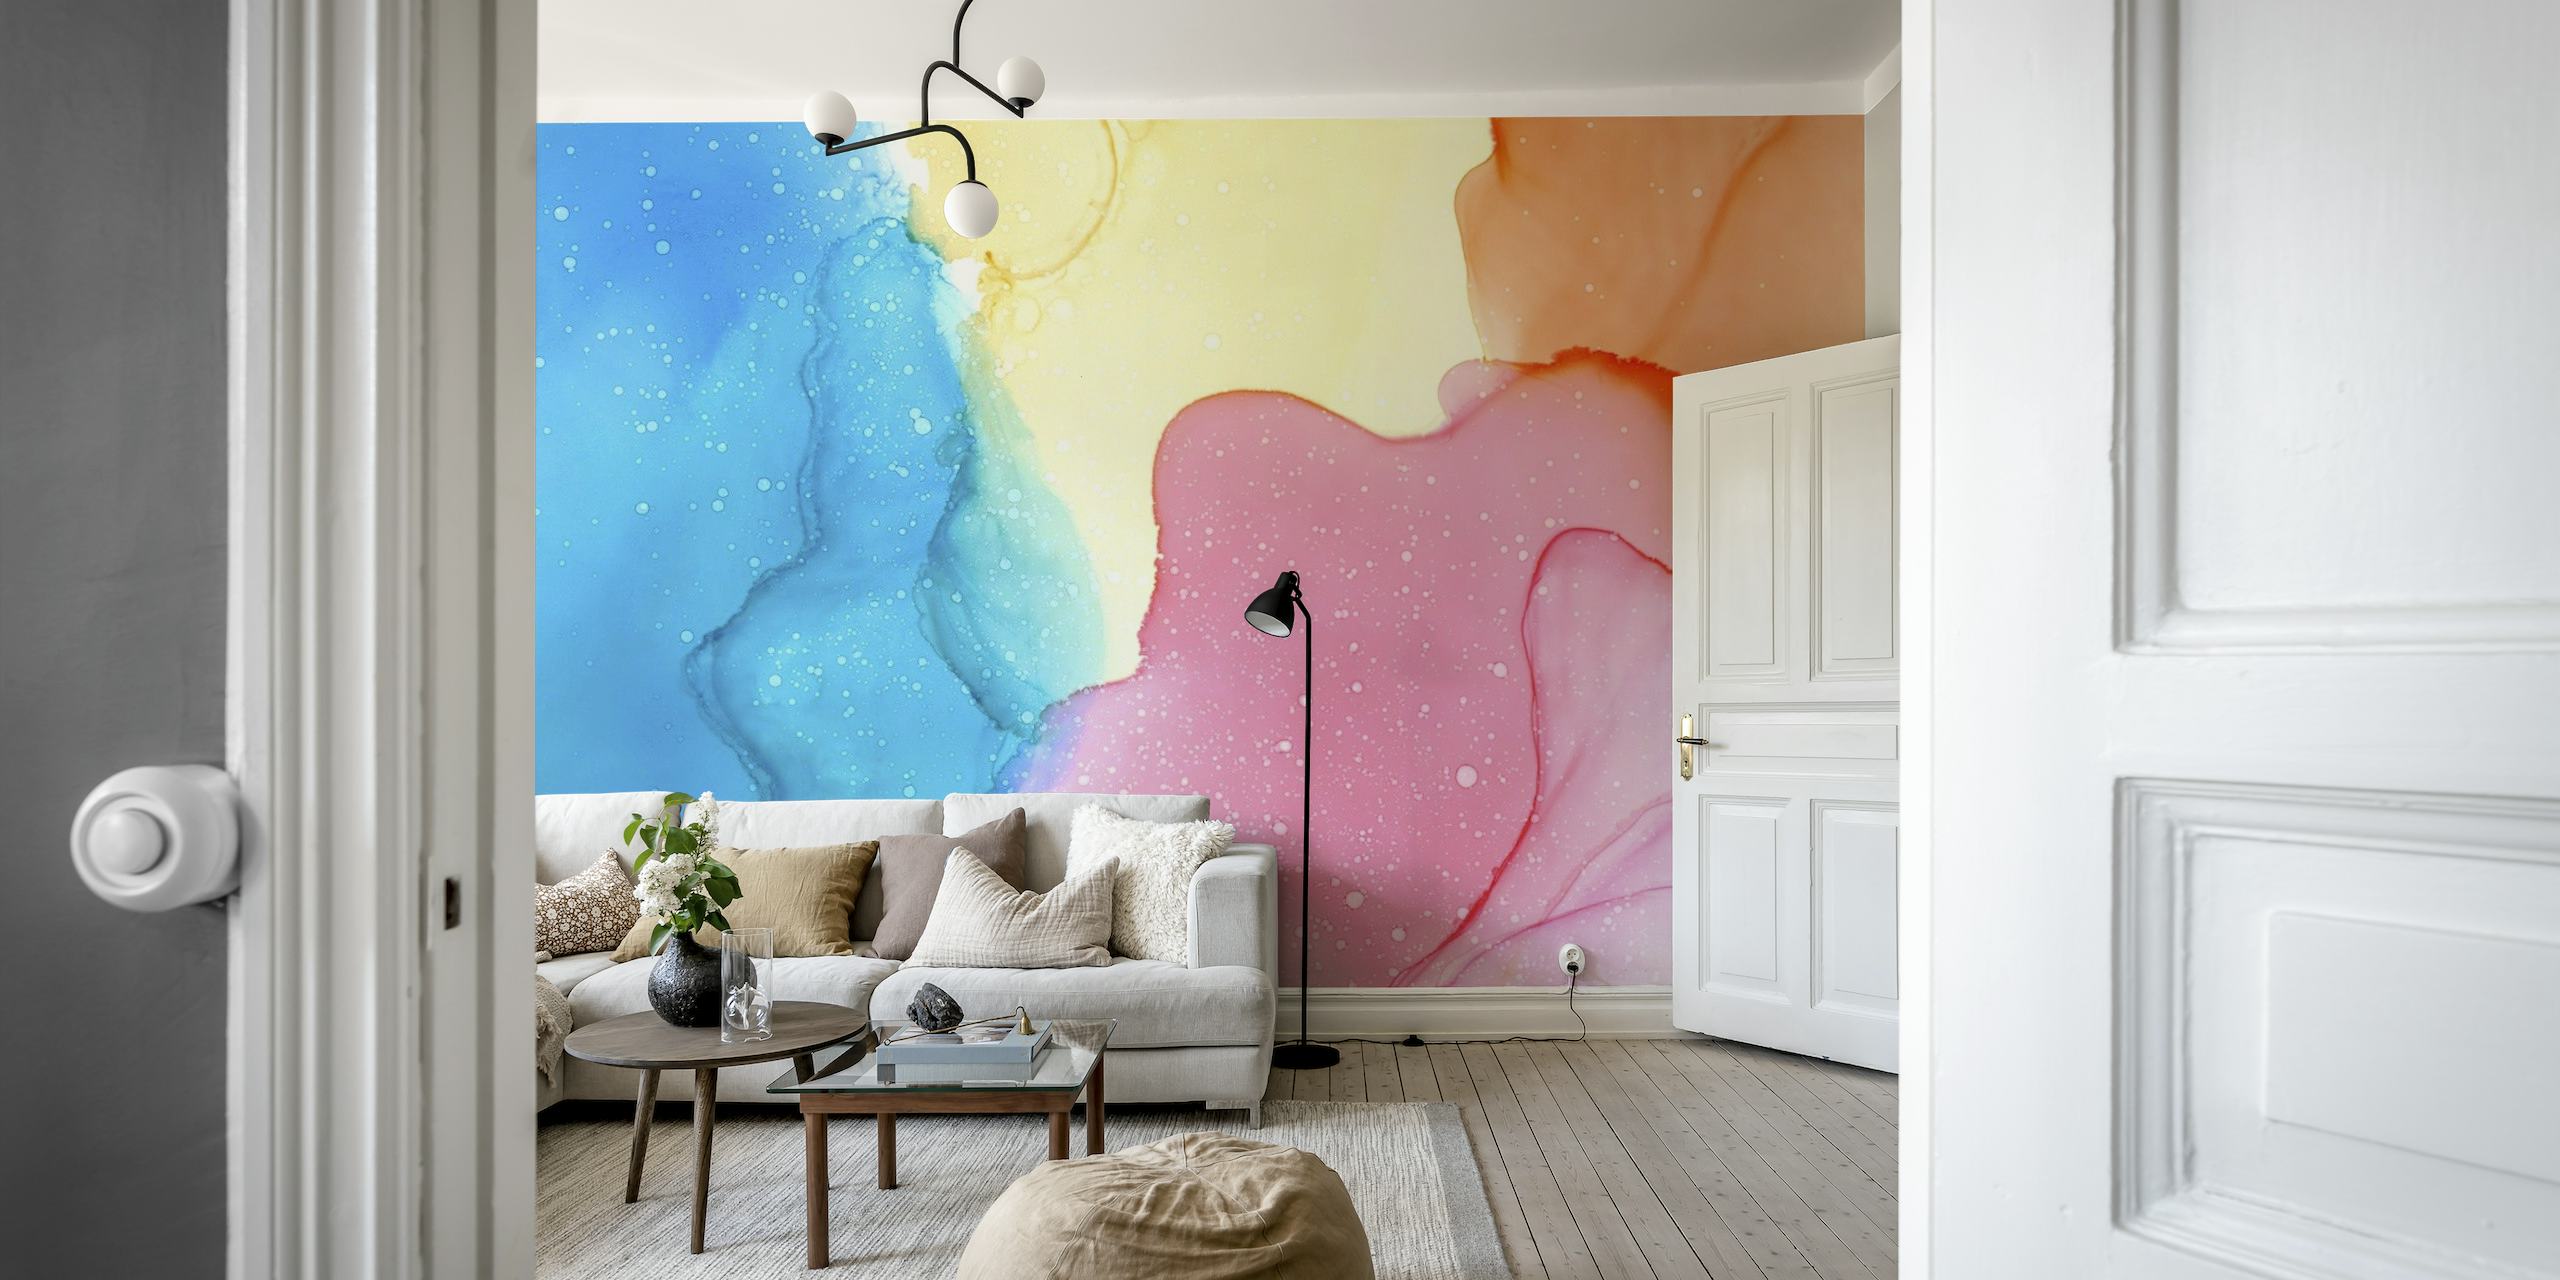 Abstract pastel watercolor wall mural with delicate blue, pink, orange, and yellow ink blends